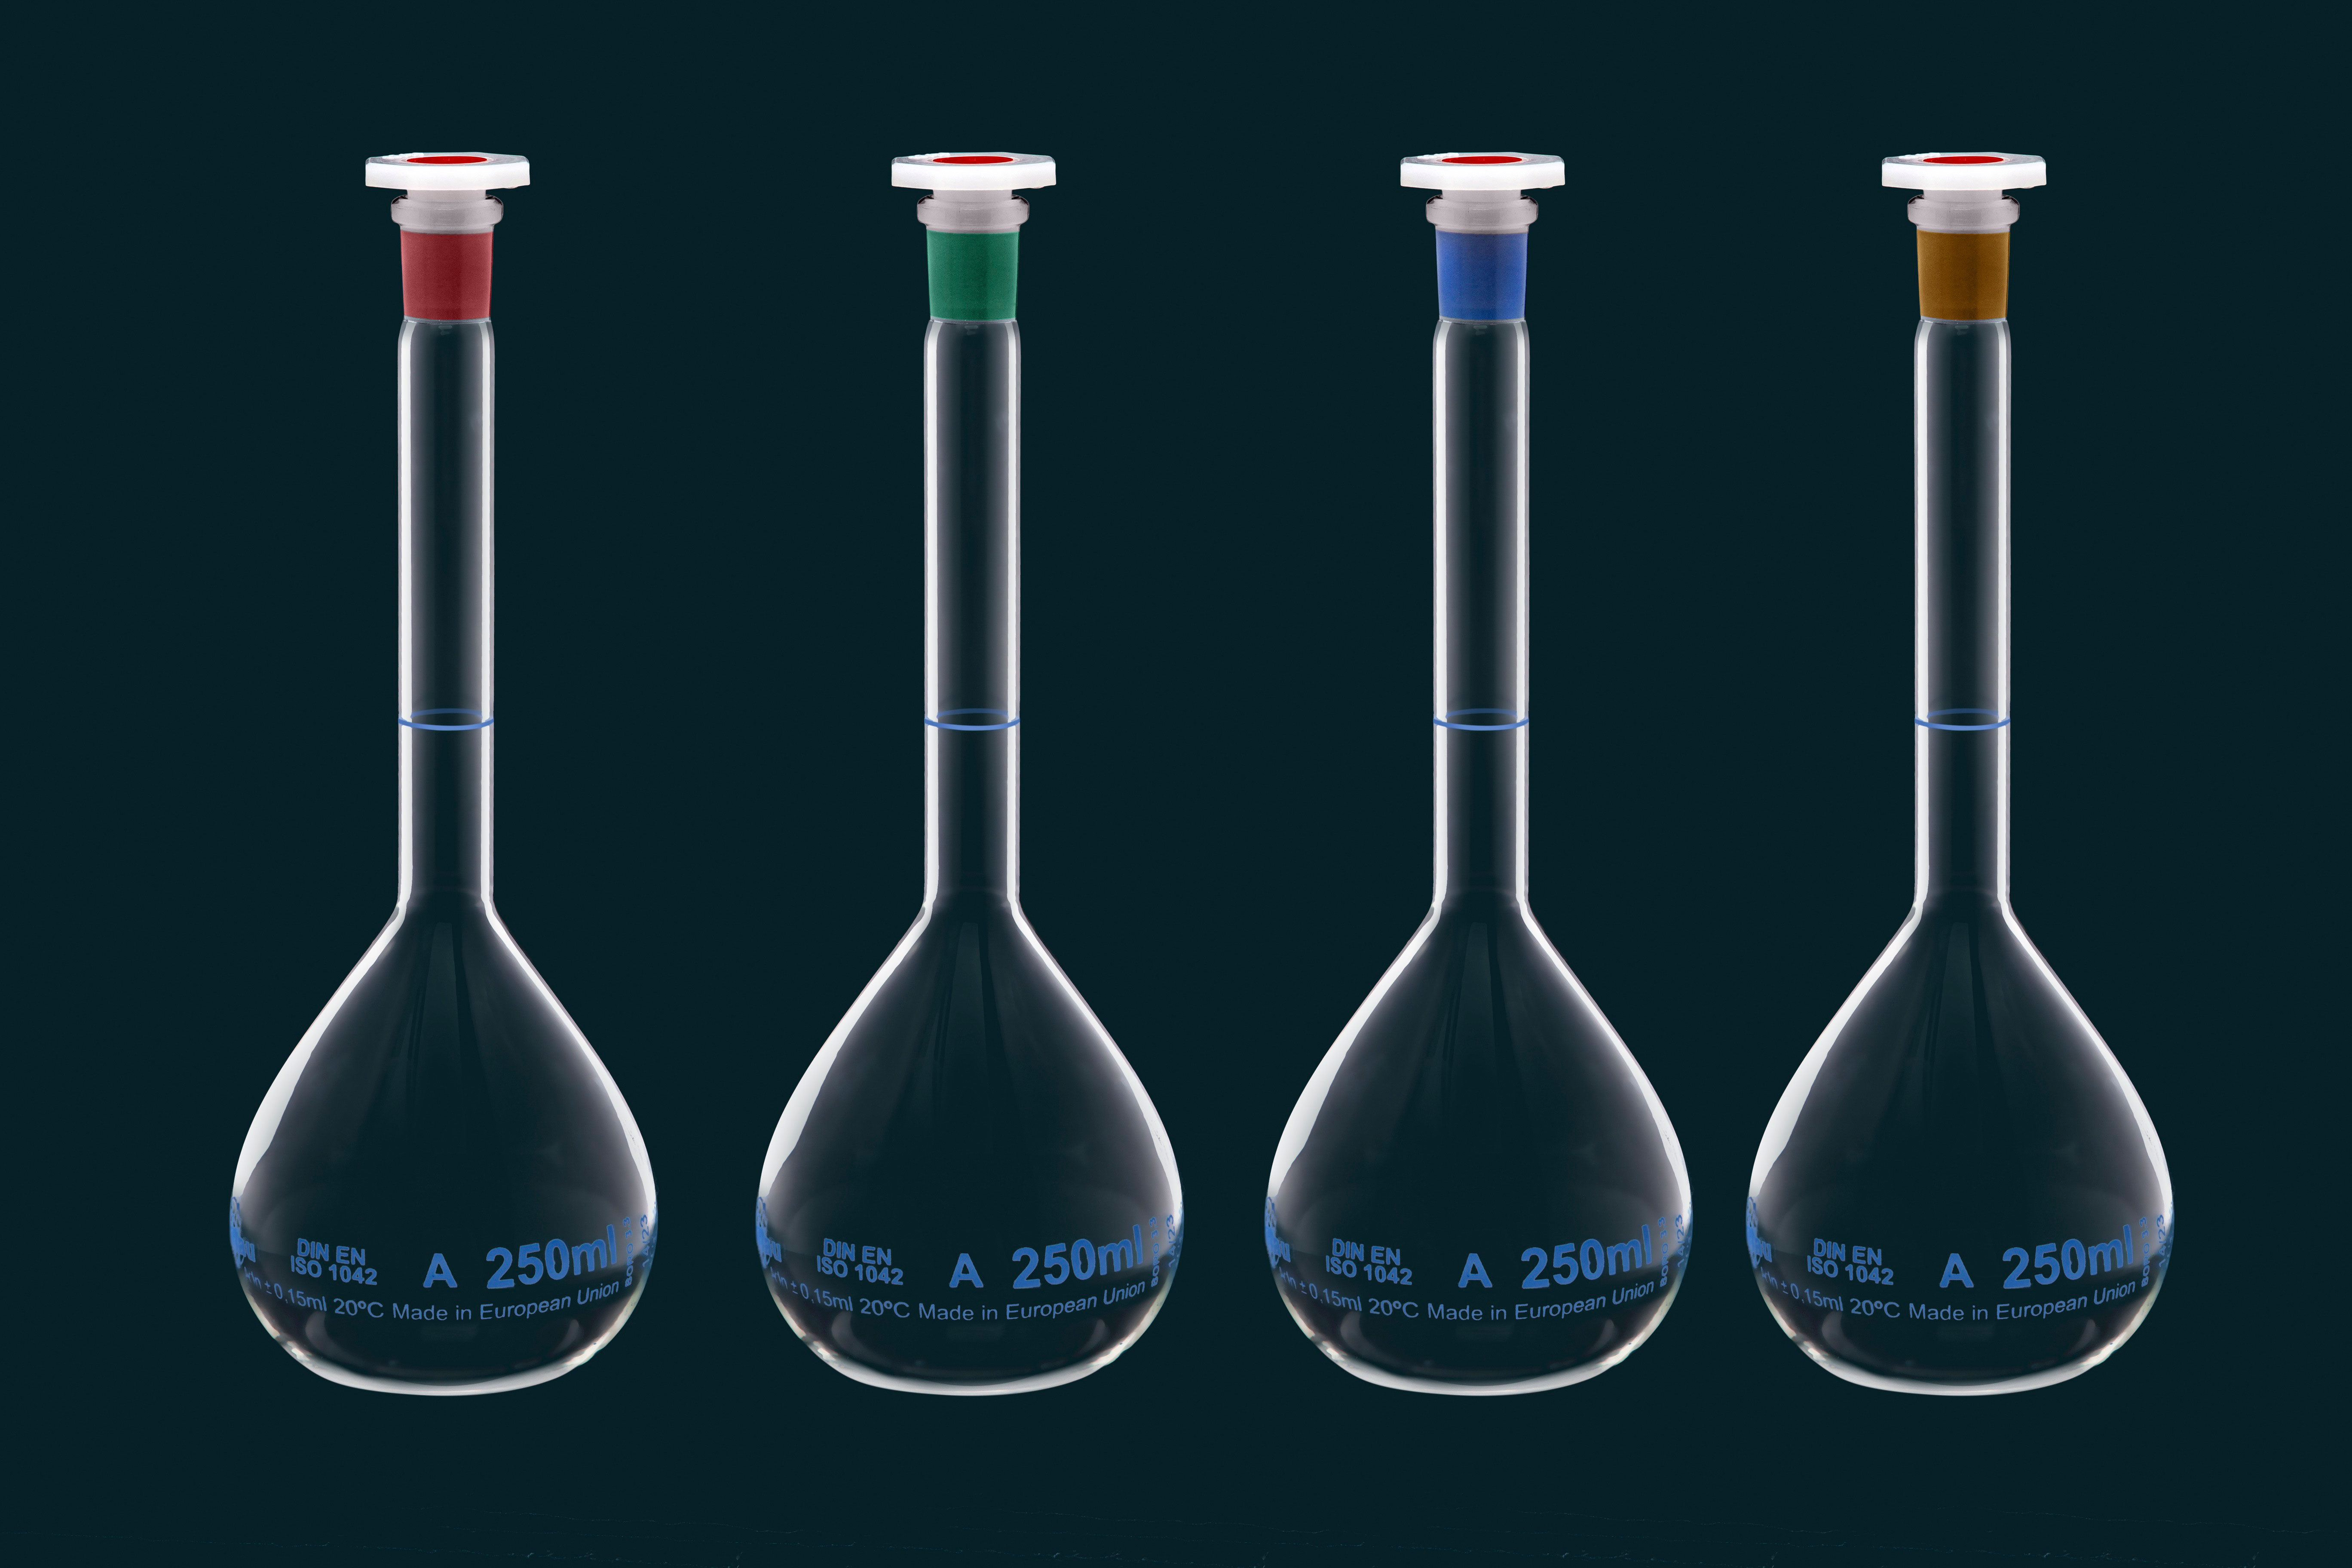 Volumetric flask with green neck, Class A, 1000ml, with PE stopper, lot number and certificate of conformity